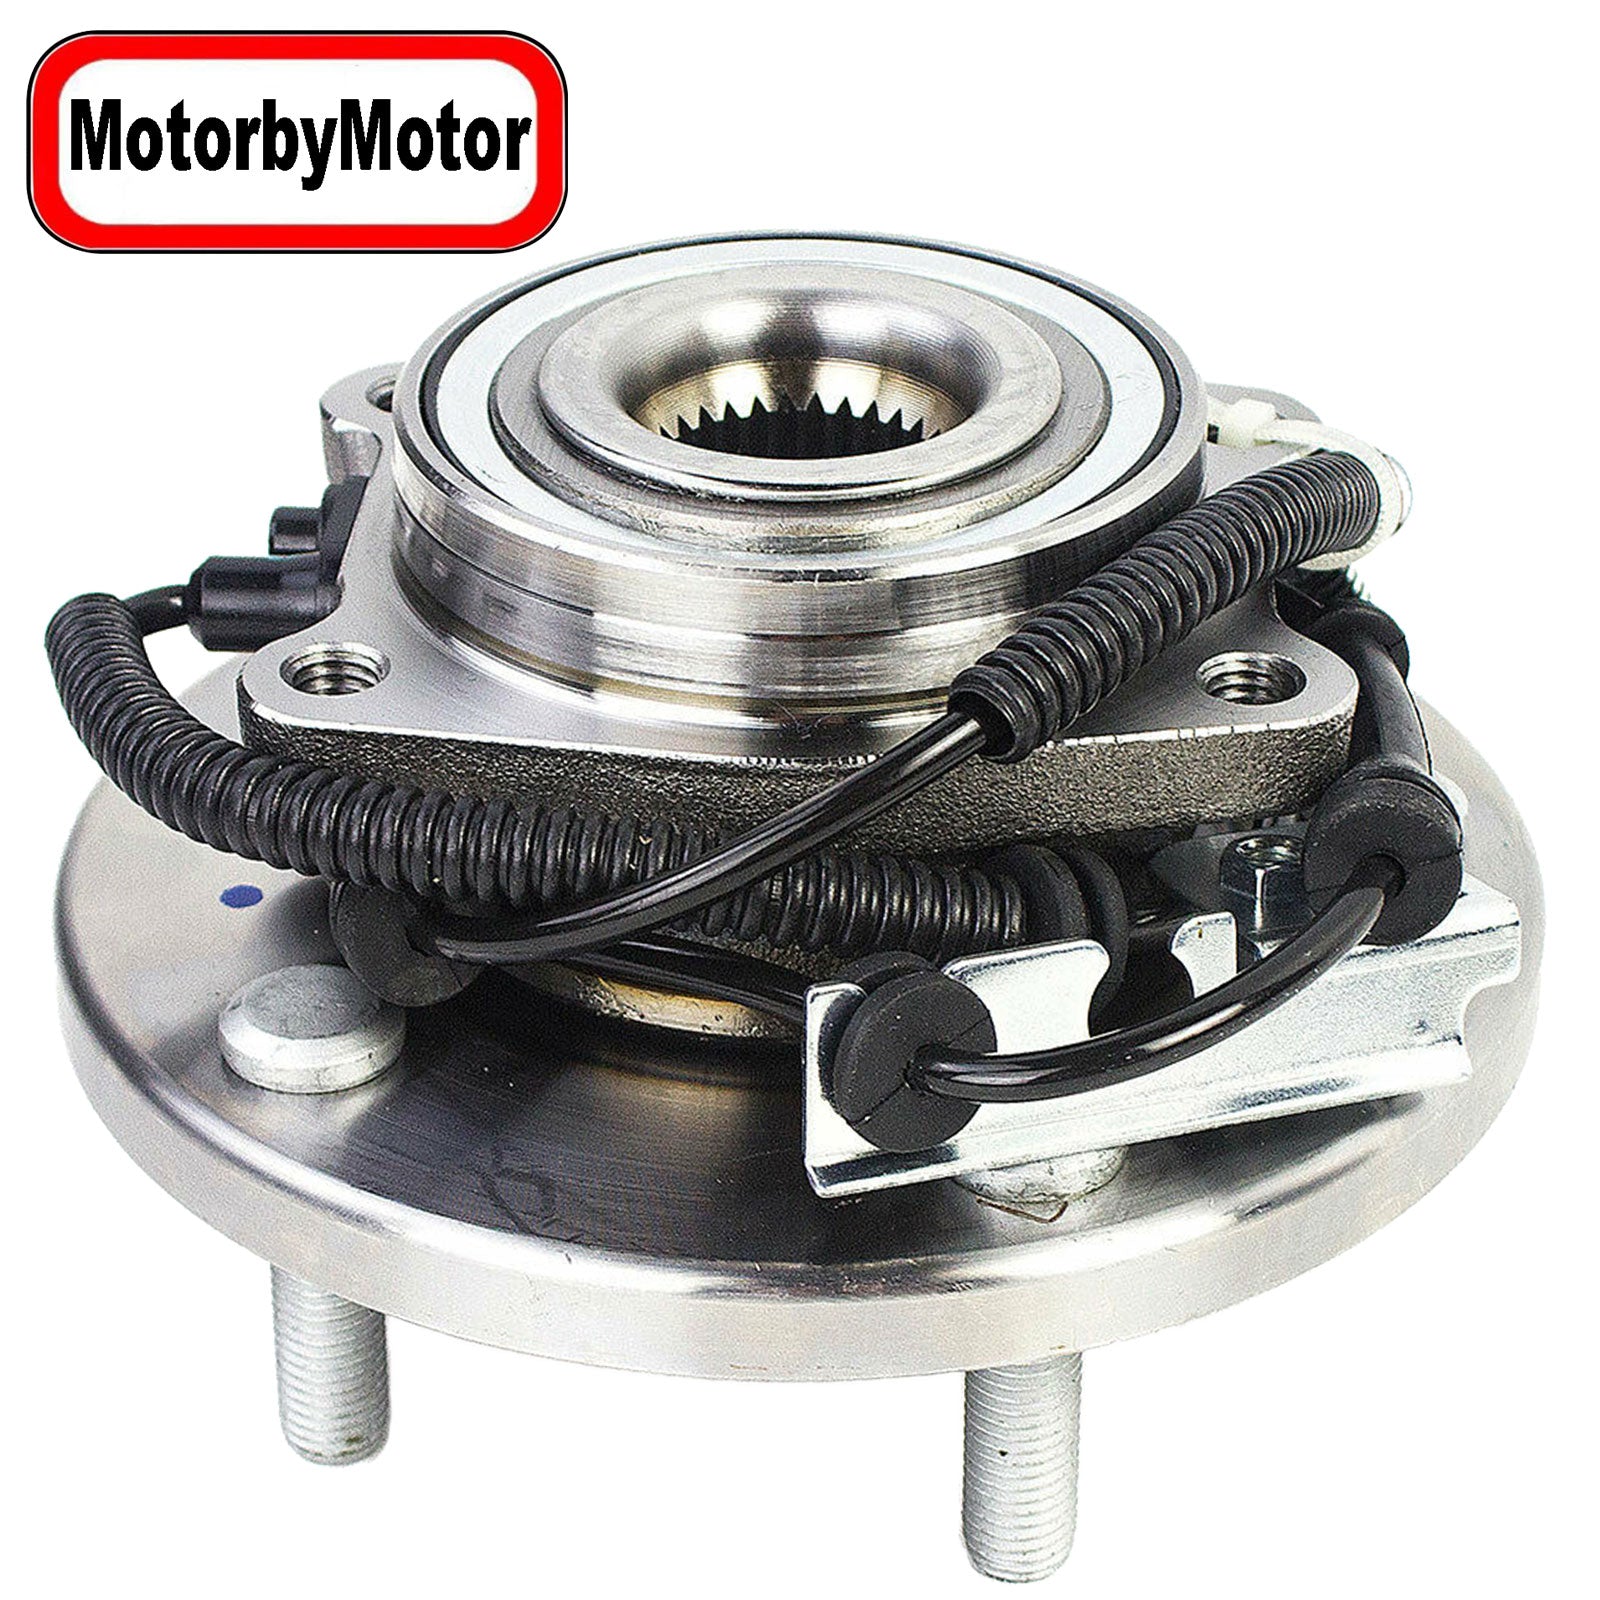 MotorbyMotor 515136 Front Heavy Duty Wheel Bearing Assembly with 5 Lugs Fits for 08-11 Chrysler Town & Country Dodge Grand Caravan, 09-12 Volkswagen Routan Wheel Bearing and Hub Assembly (w/ABS) MotorbyMotor